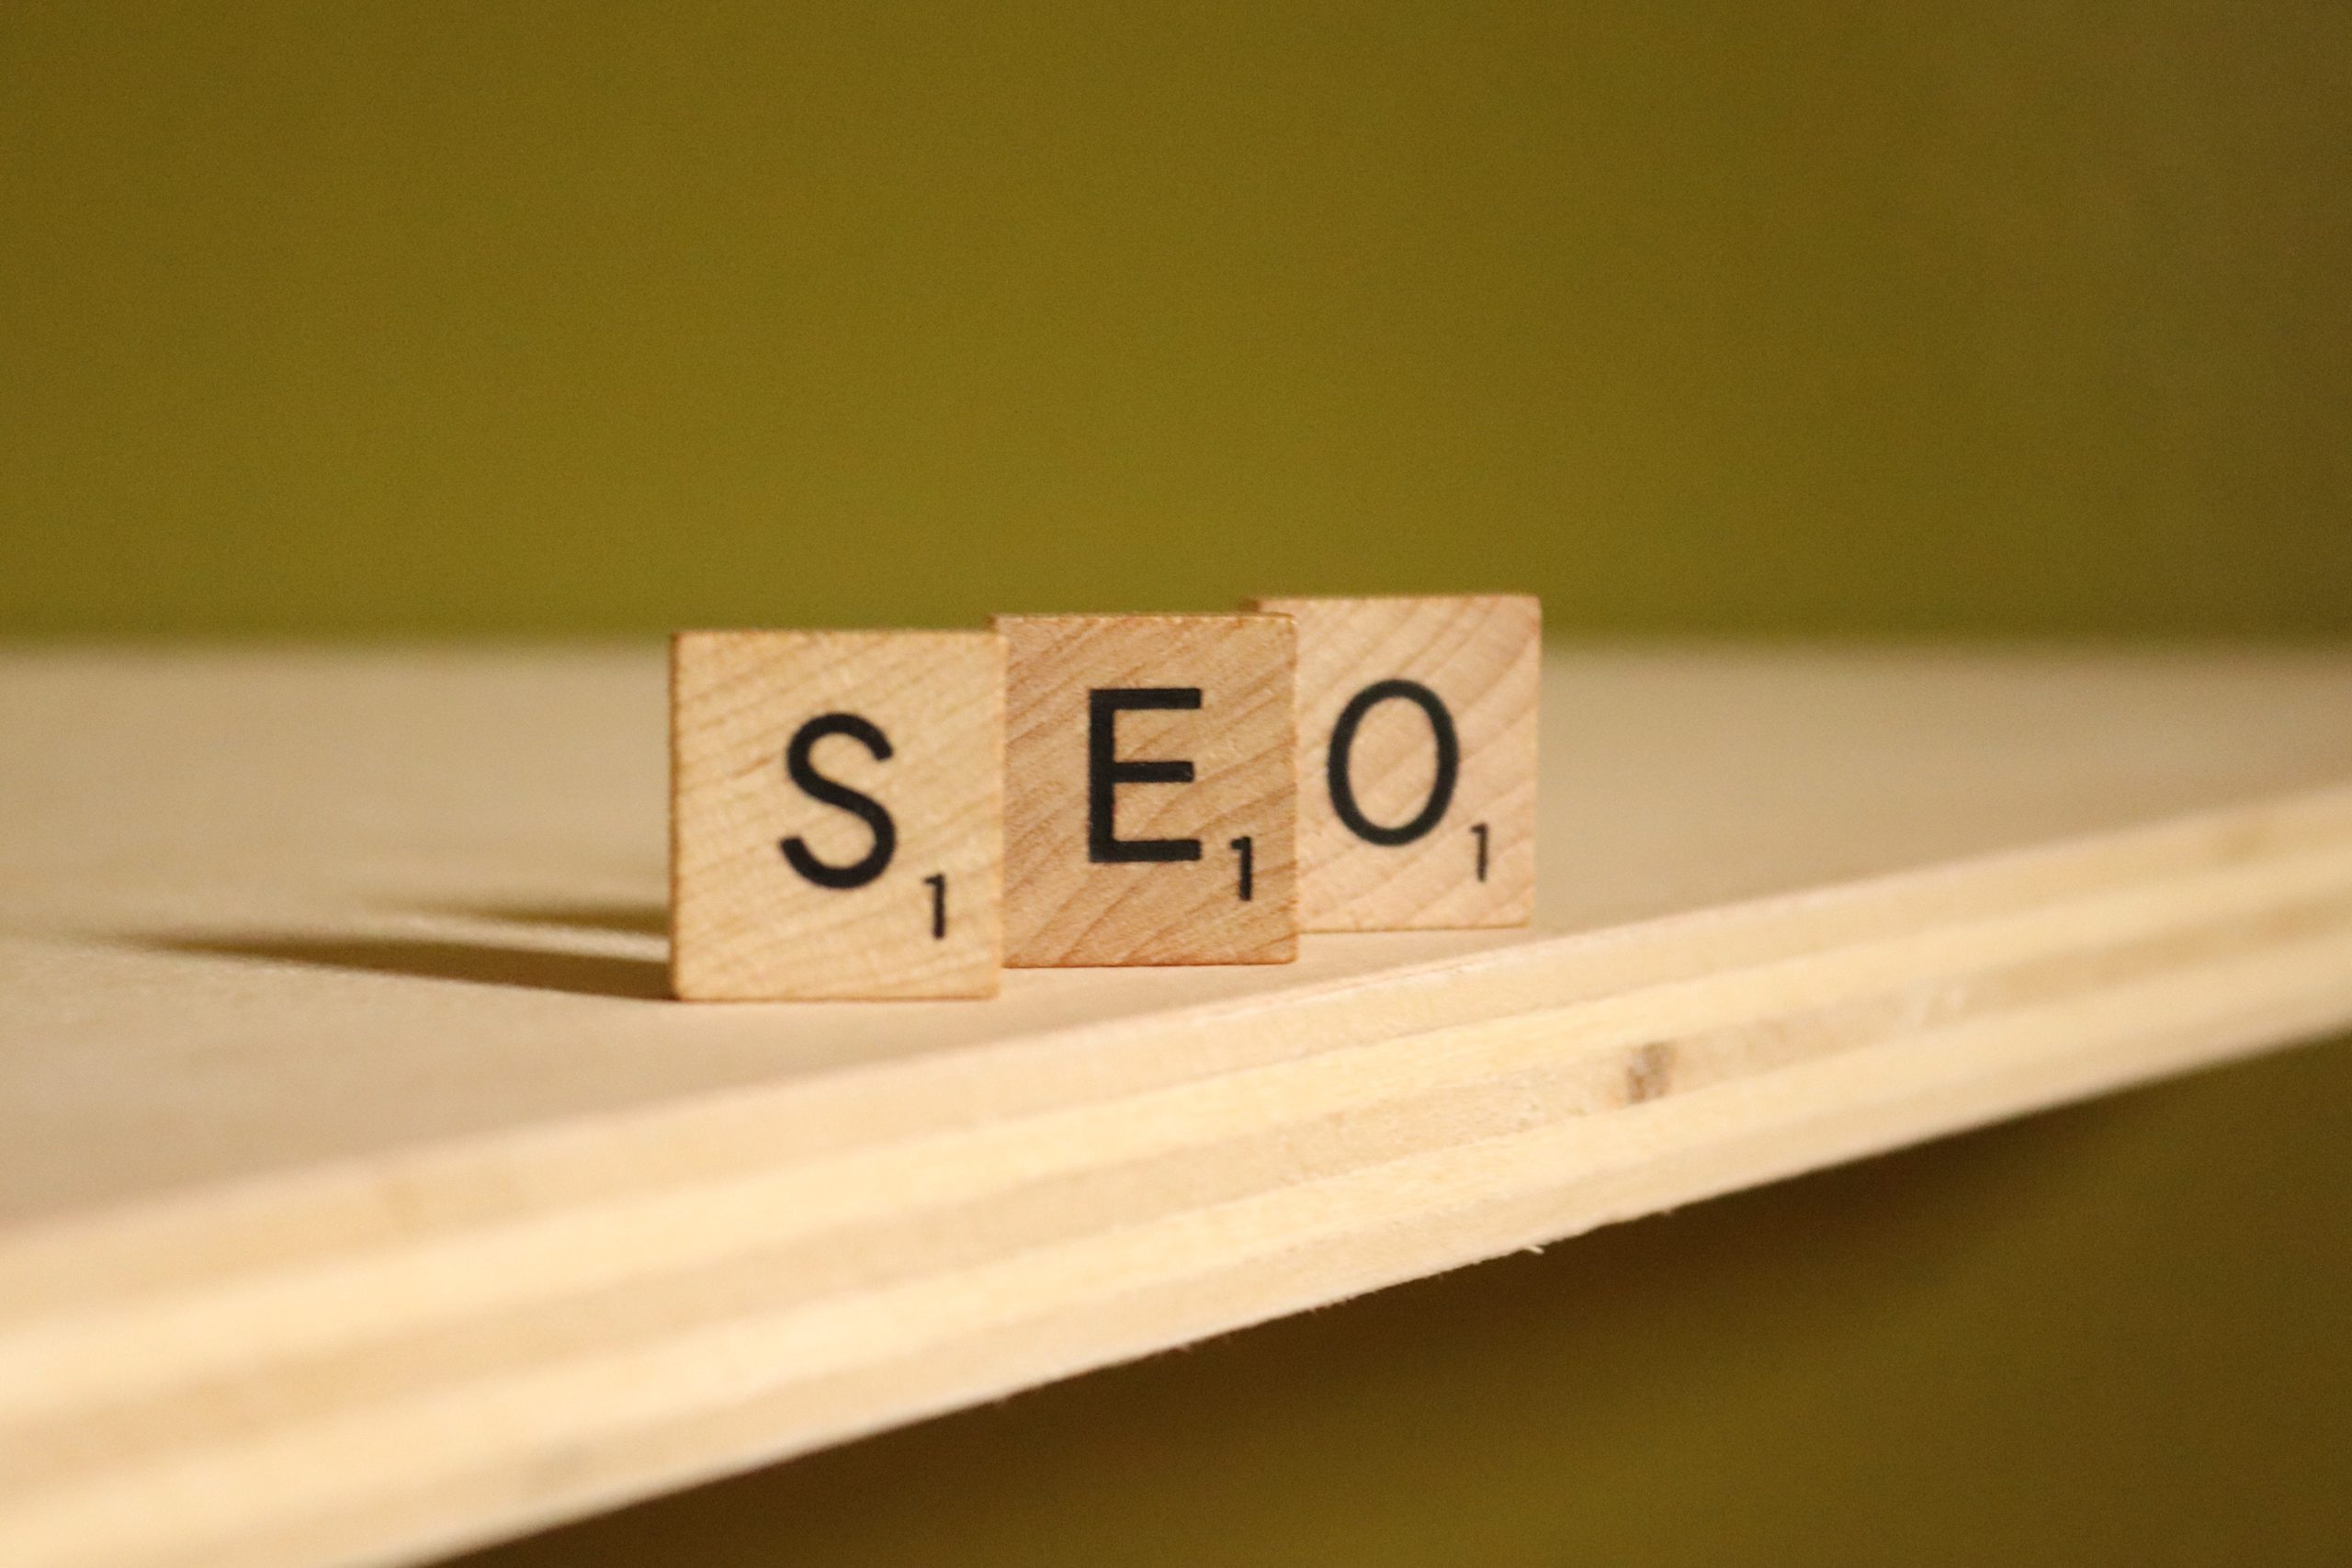 SEO tiles on table as a lead-in image to discuss the 10 top tips for creating SEO-friendly content.